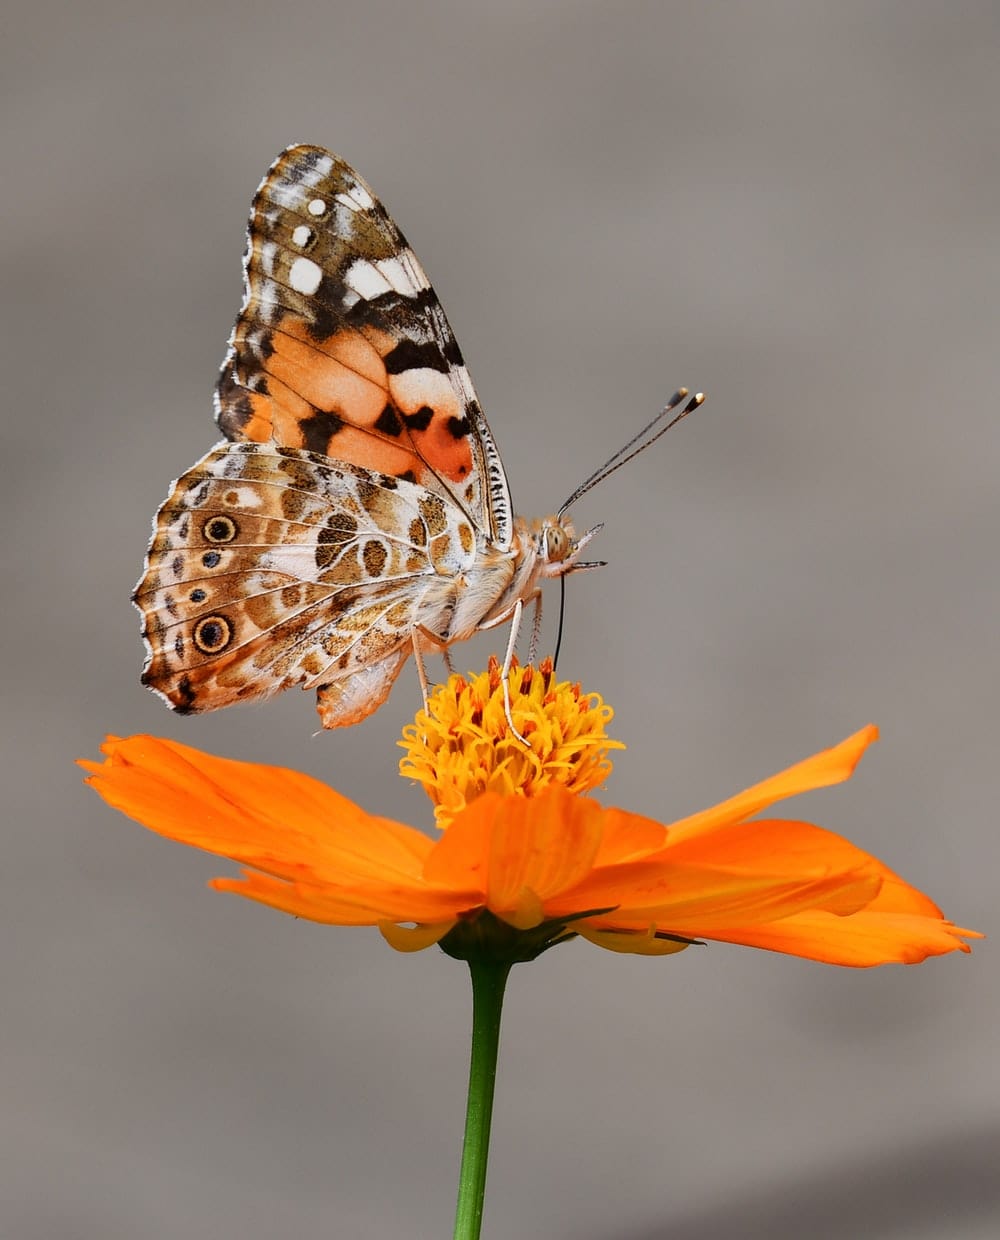 Cross Stitch | Butterfly - Selective Focus Photography Of Butterfly On Orange Petaled Flower - Cross Stitched